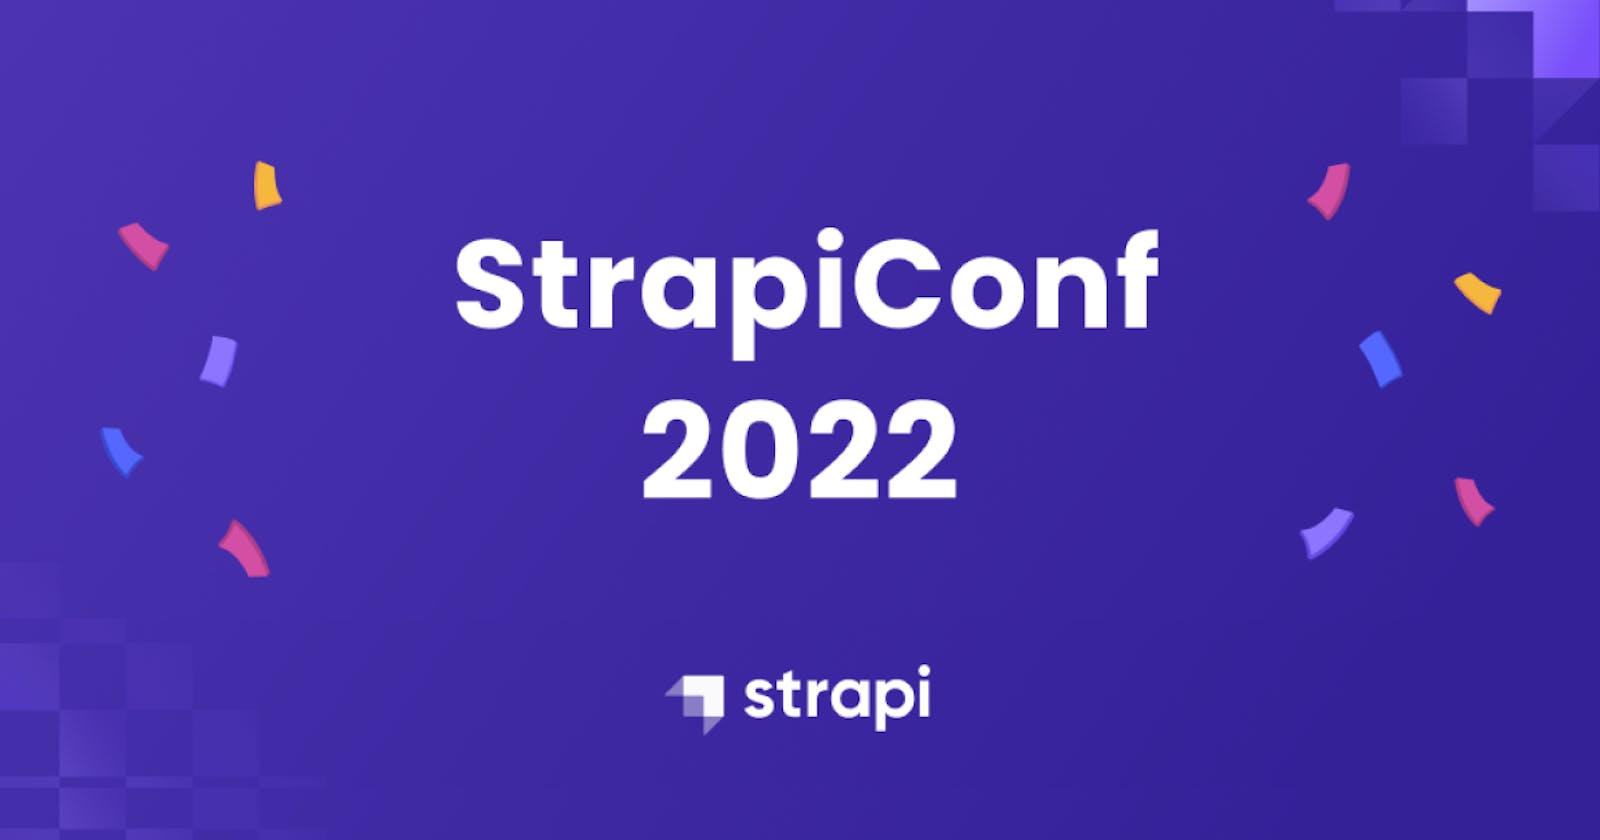 Our 3 favorite talks from StrapiConf 2022